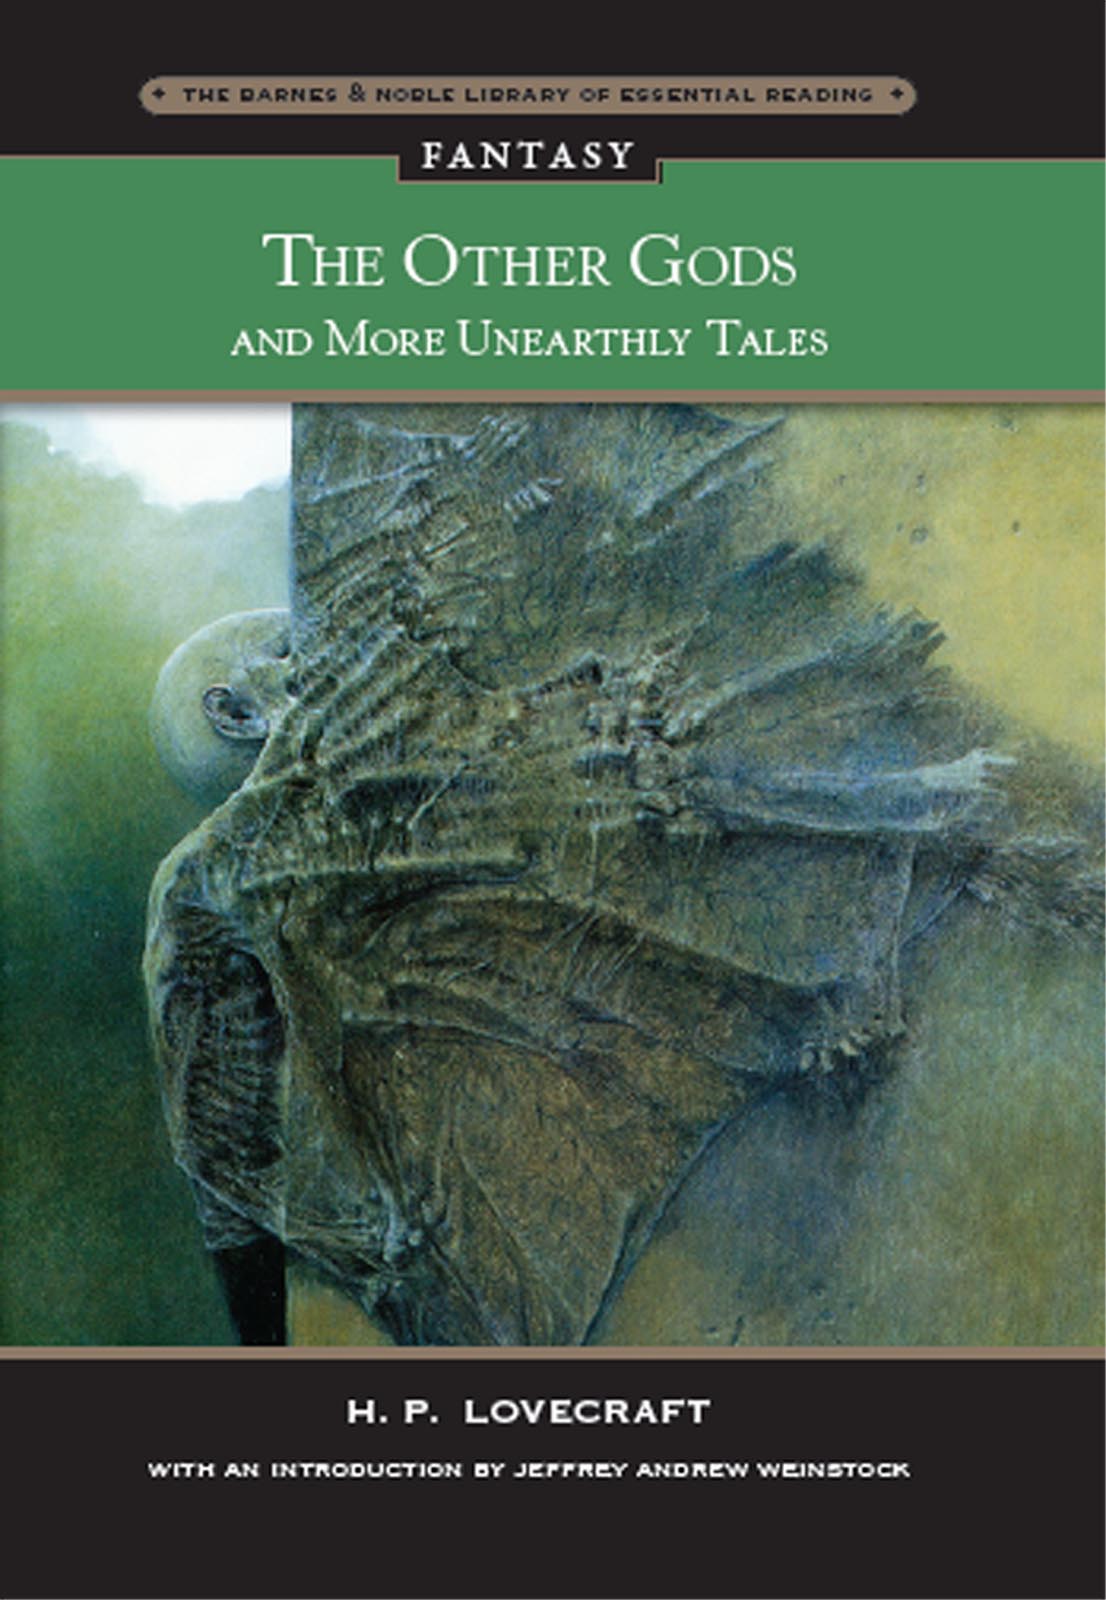 The Other Gods and More Unearthly Tales